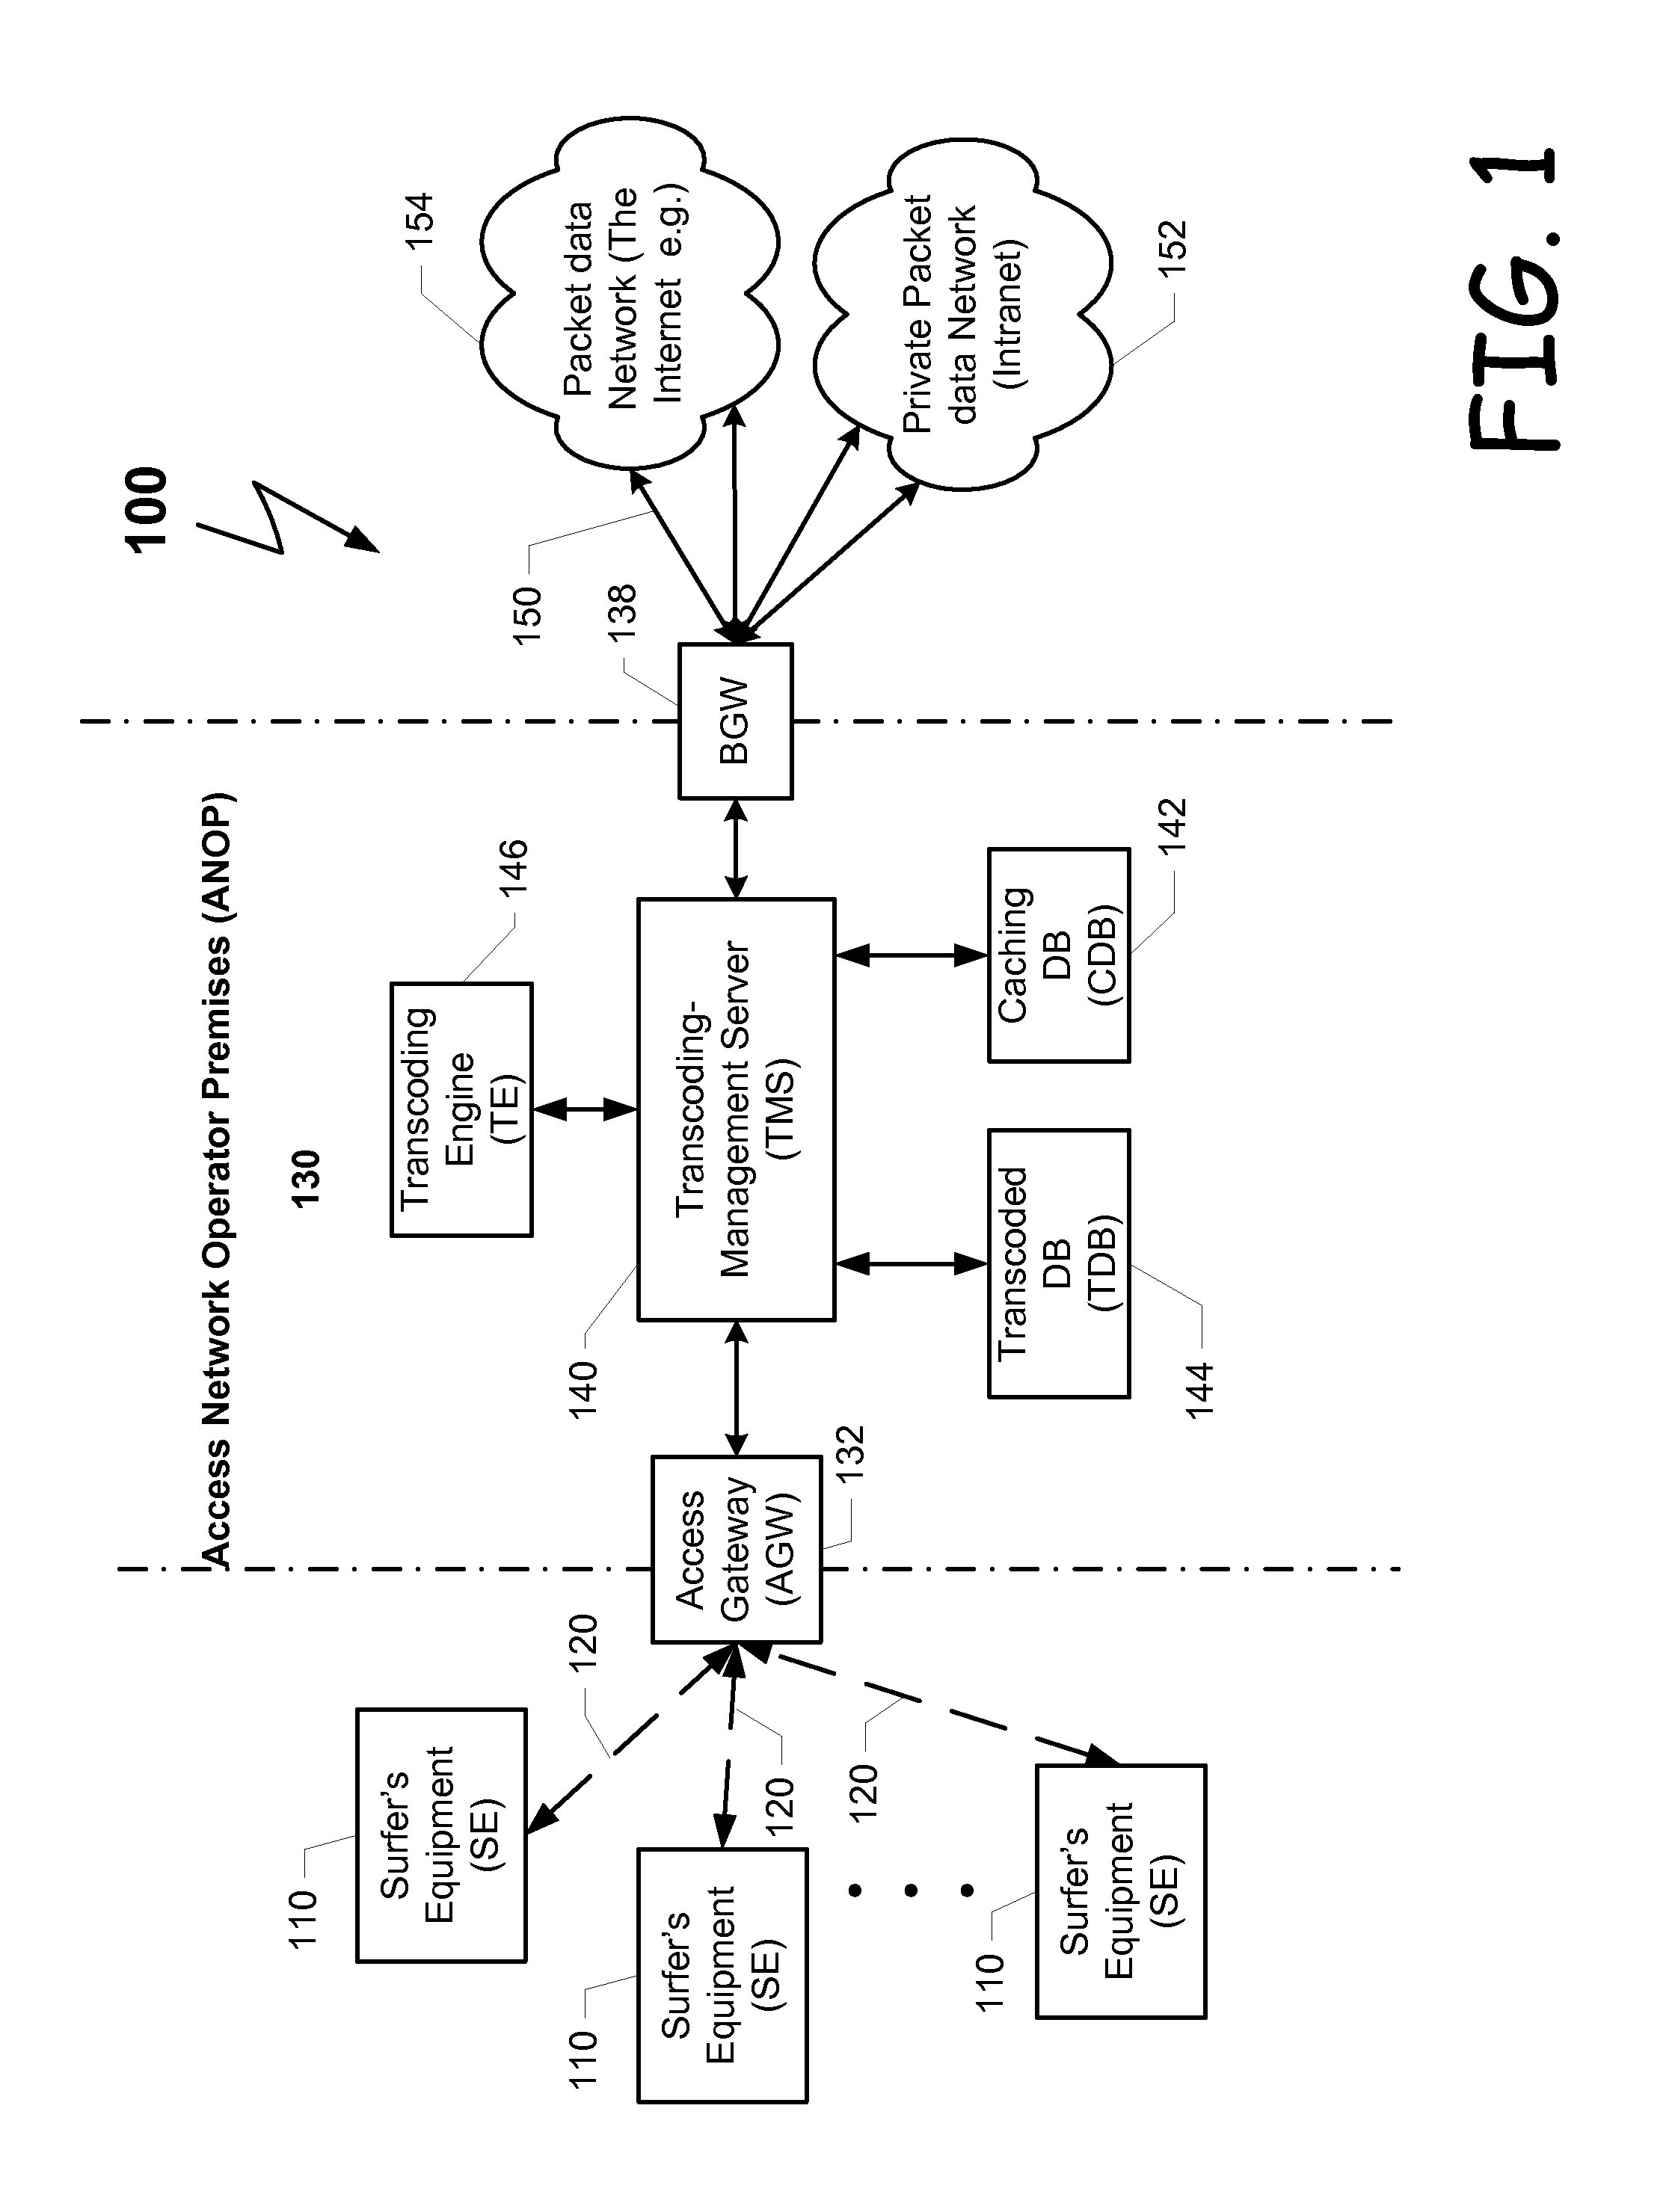 Method and system for providing the download of transcoded files